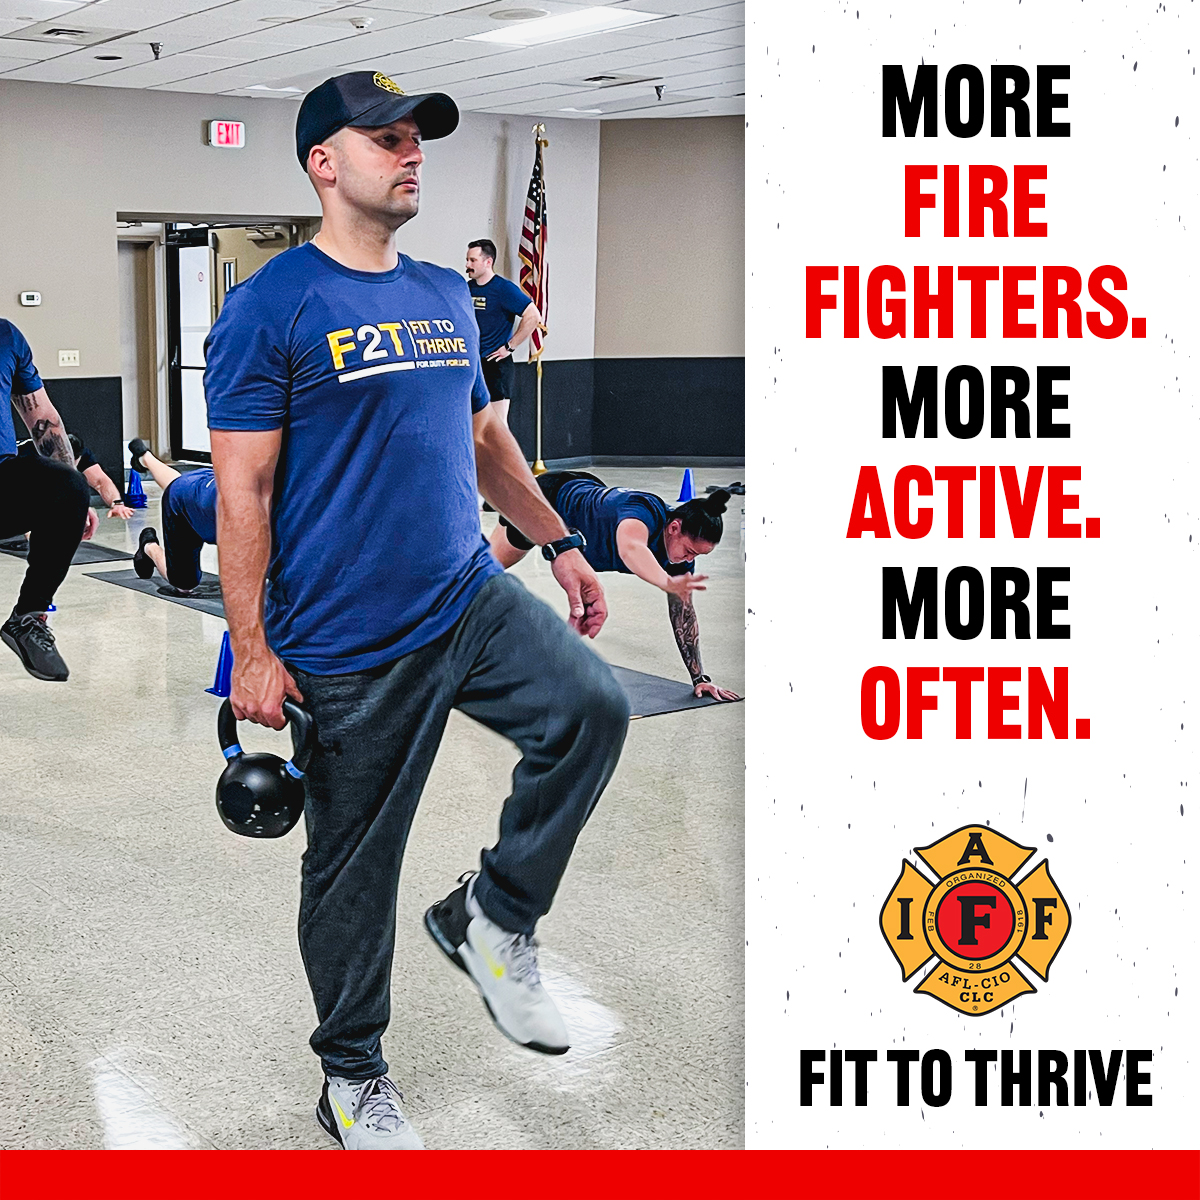 Need CECs to renew your PFT Certificate? Fit To Thrive offers multiple options including self-paced workshops. For a list of all available options, visit: bit.ly/49mDxo7 To see complete renewal requirements: bit.ly/3PbHfJi @IAFFofficial @F2T_IAFF